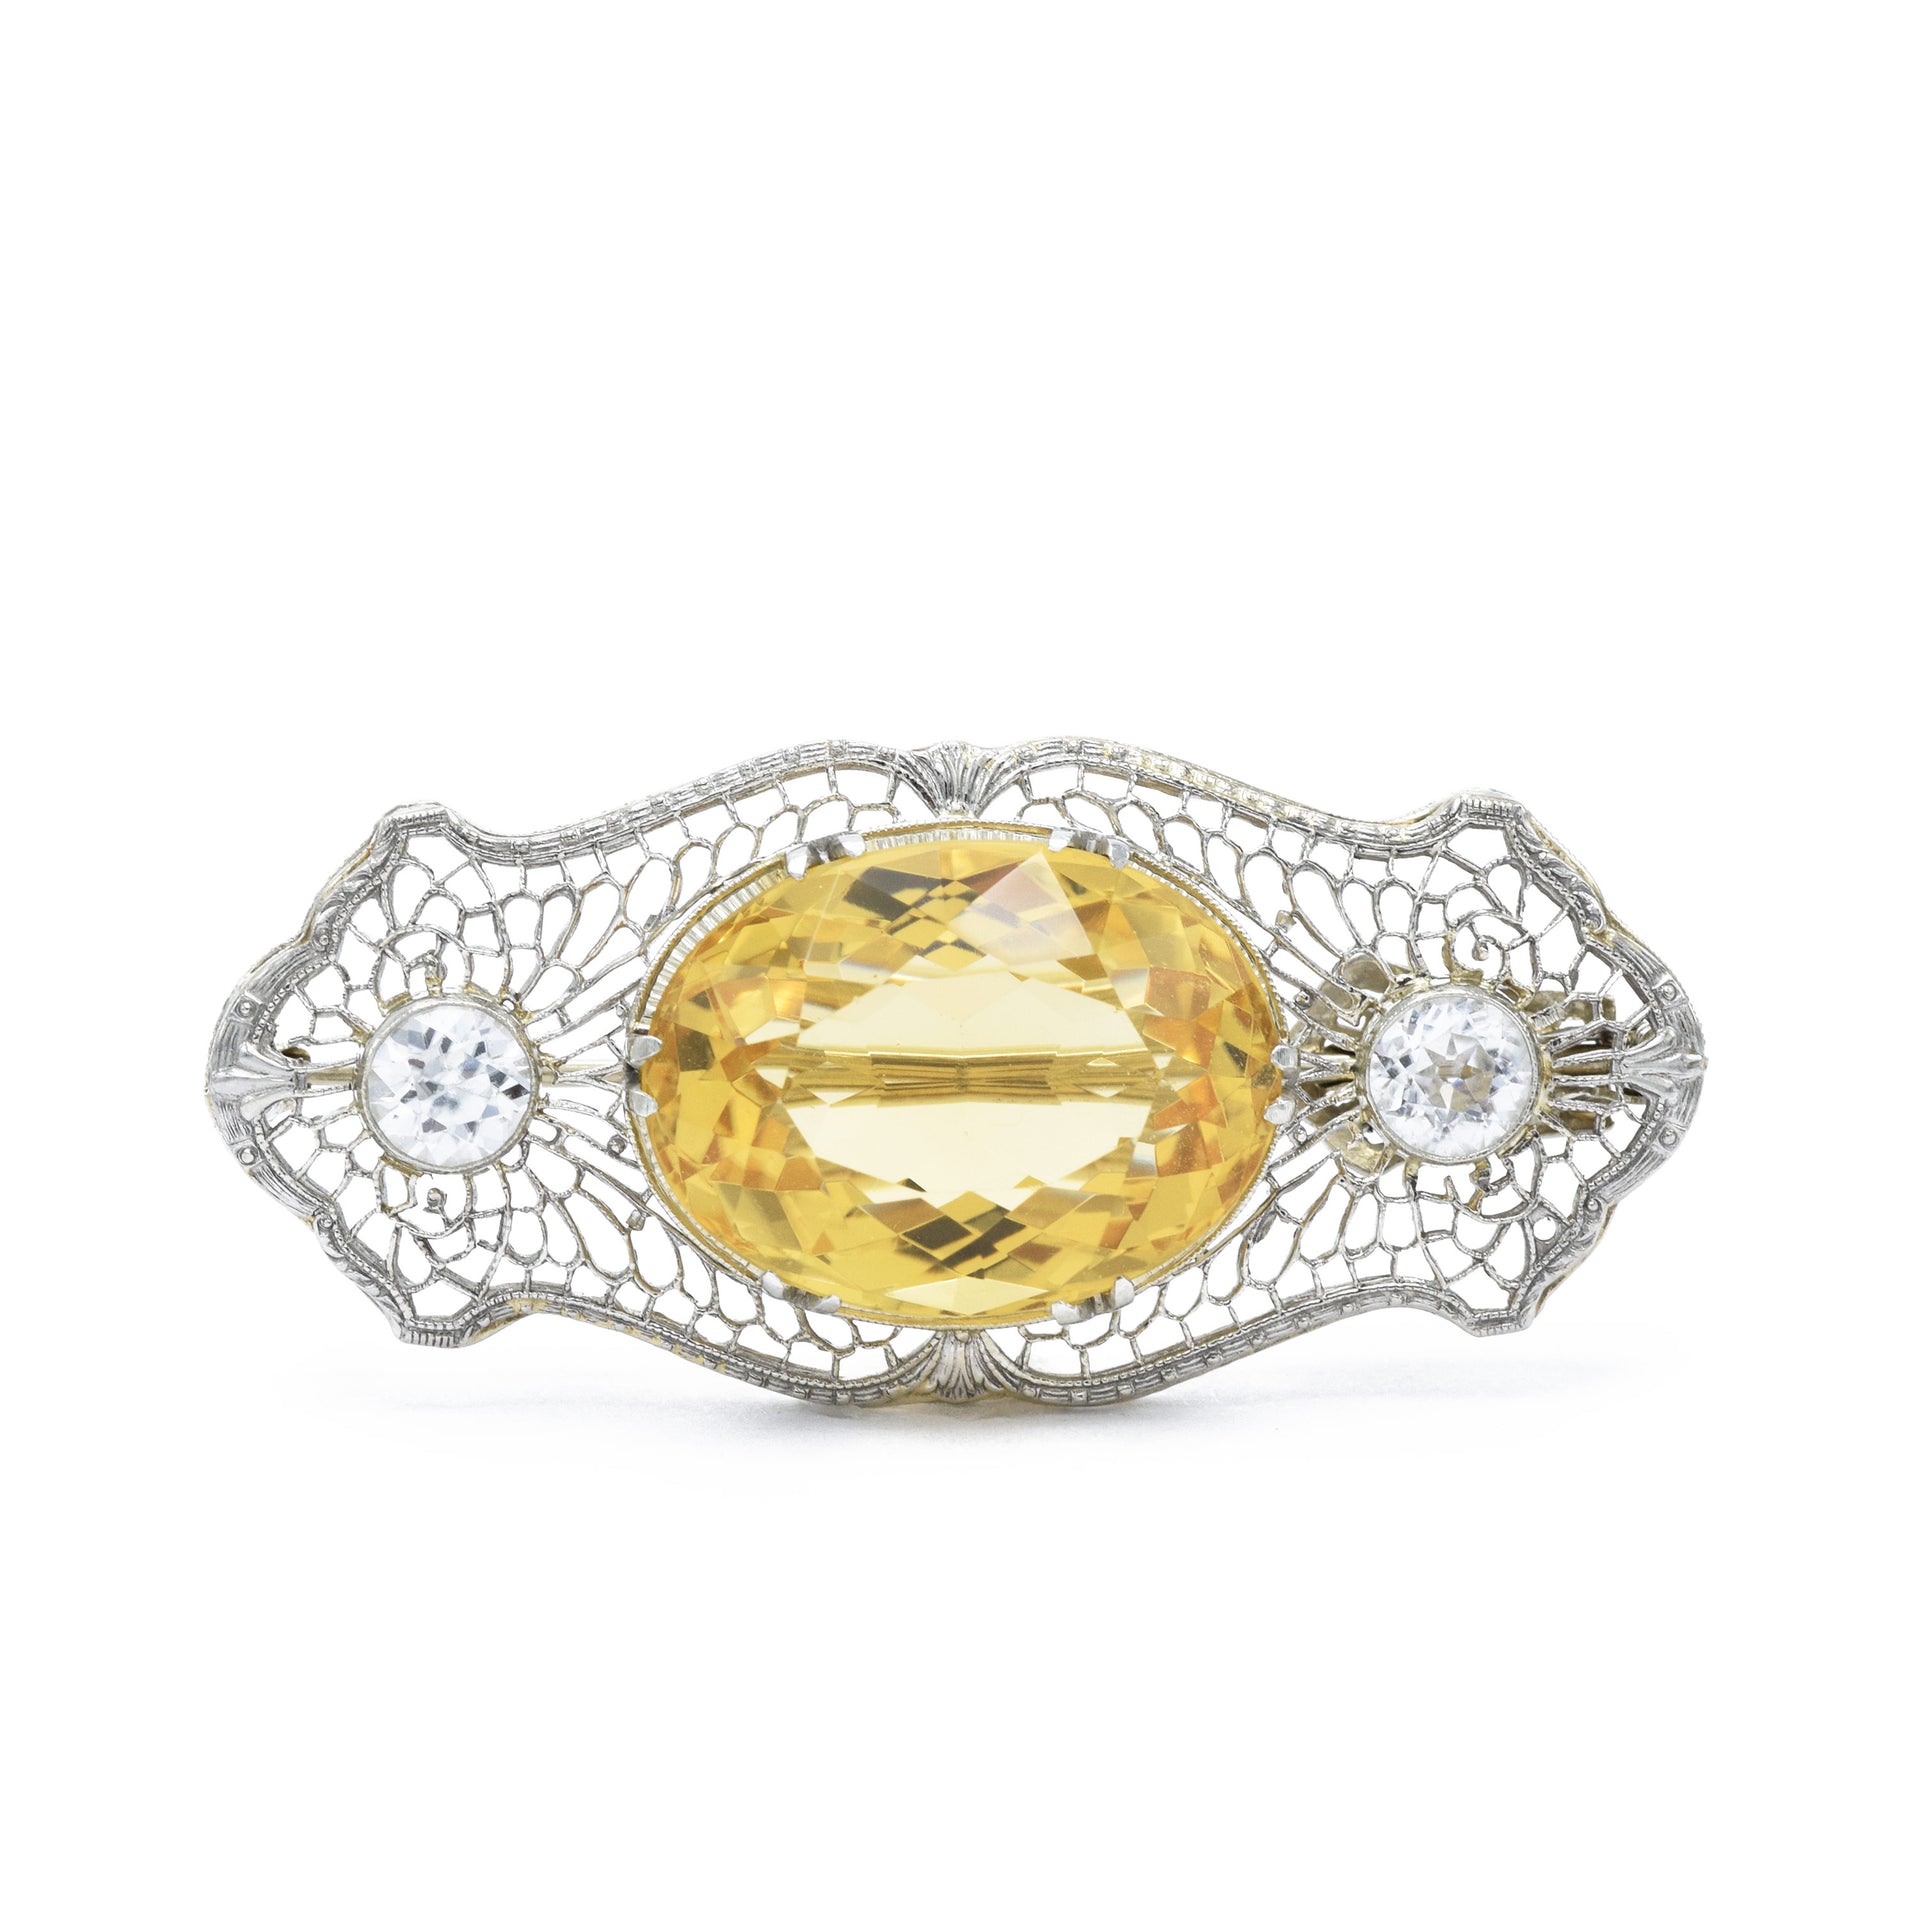 Art Nouveau, Gold Filigree with Citrine and Sapphires